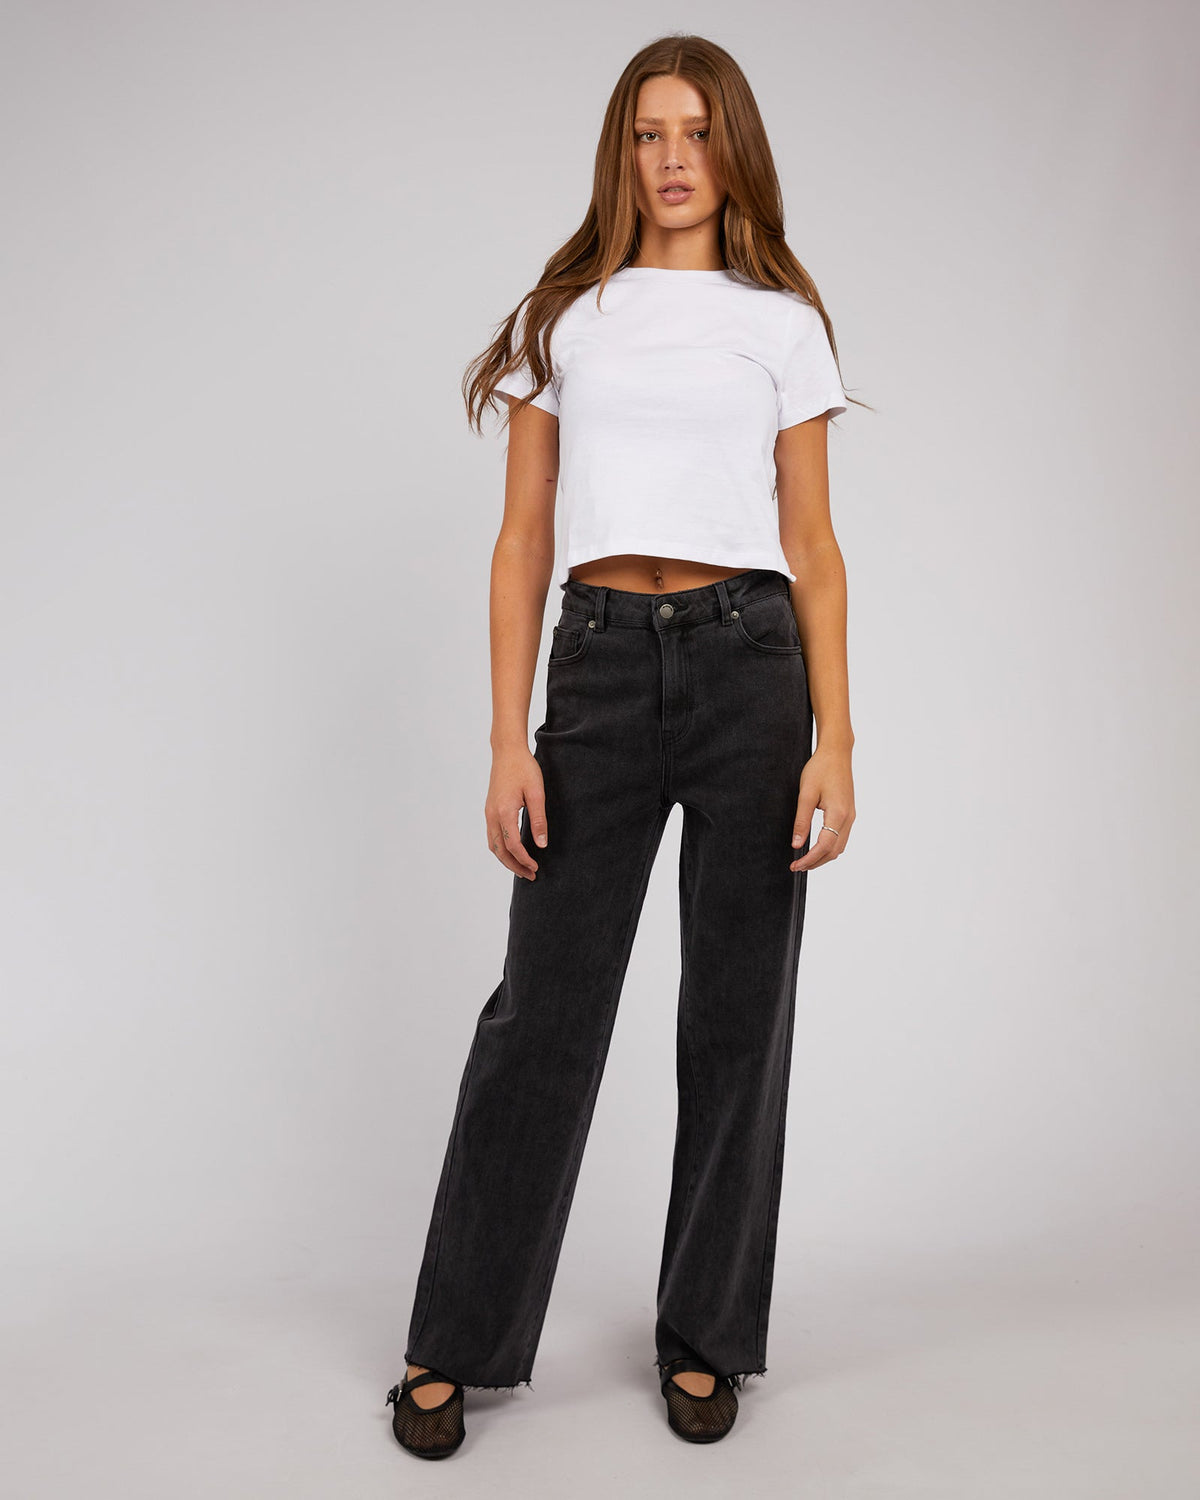 All About Eve-Skye Comfort Jean Washed Black-Edge Clothing